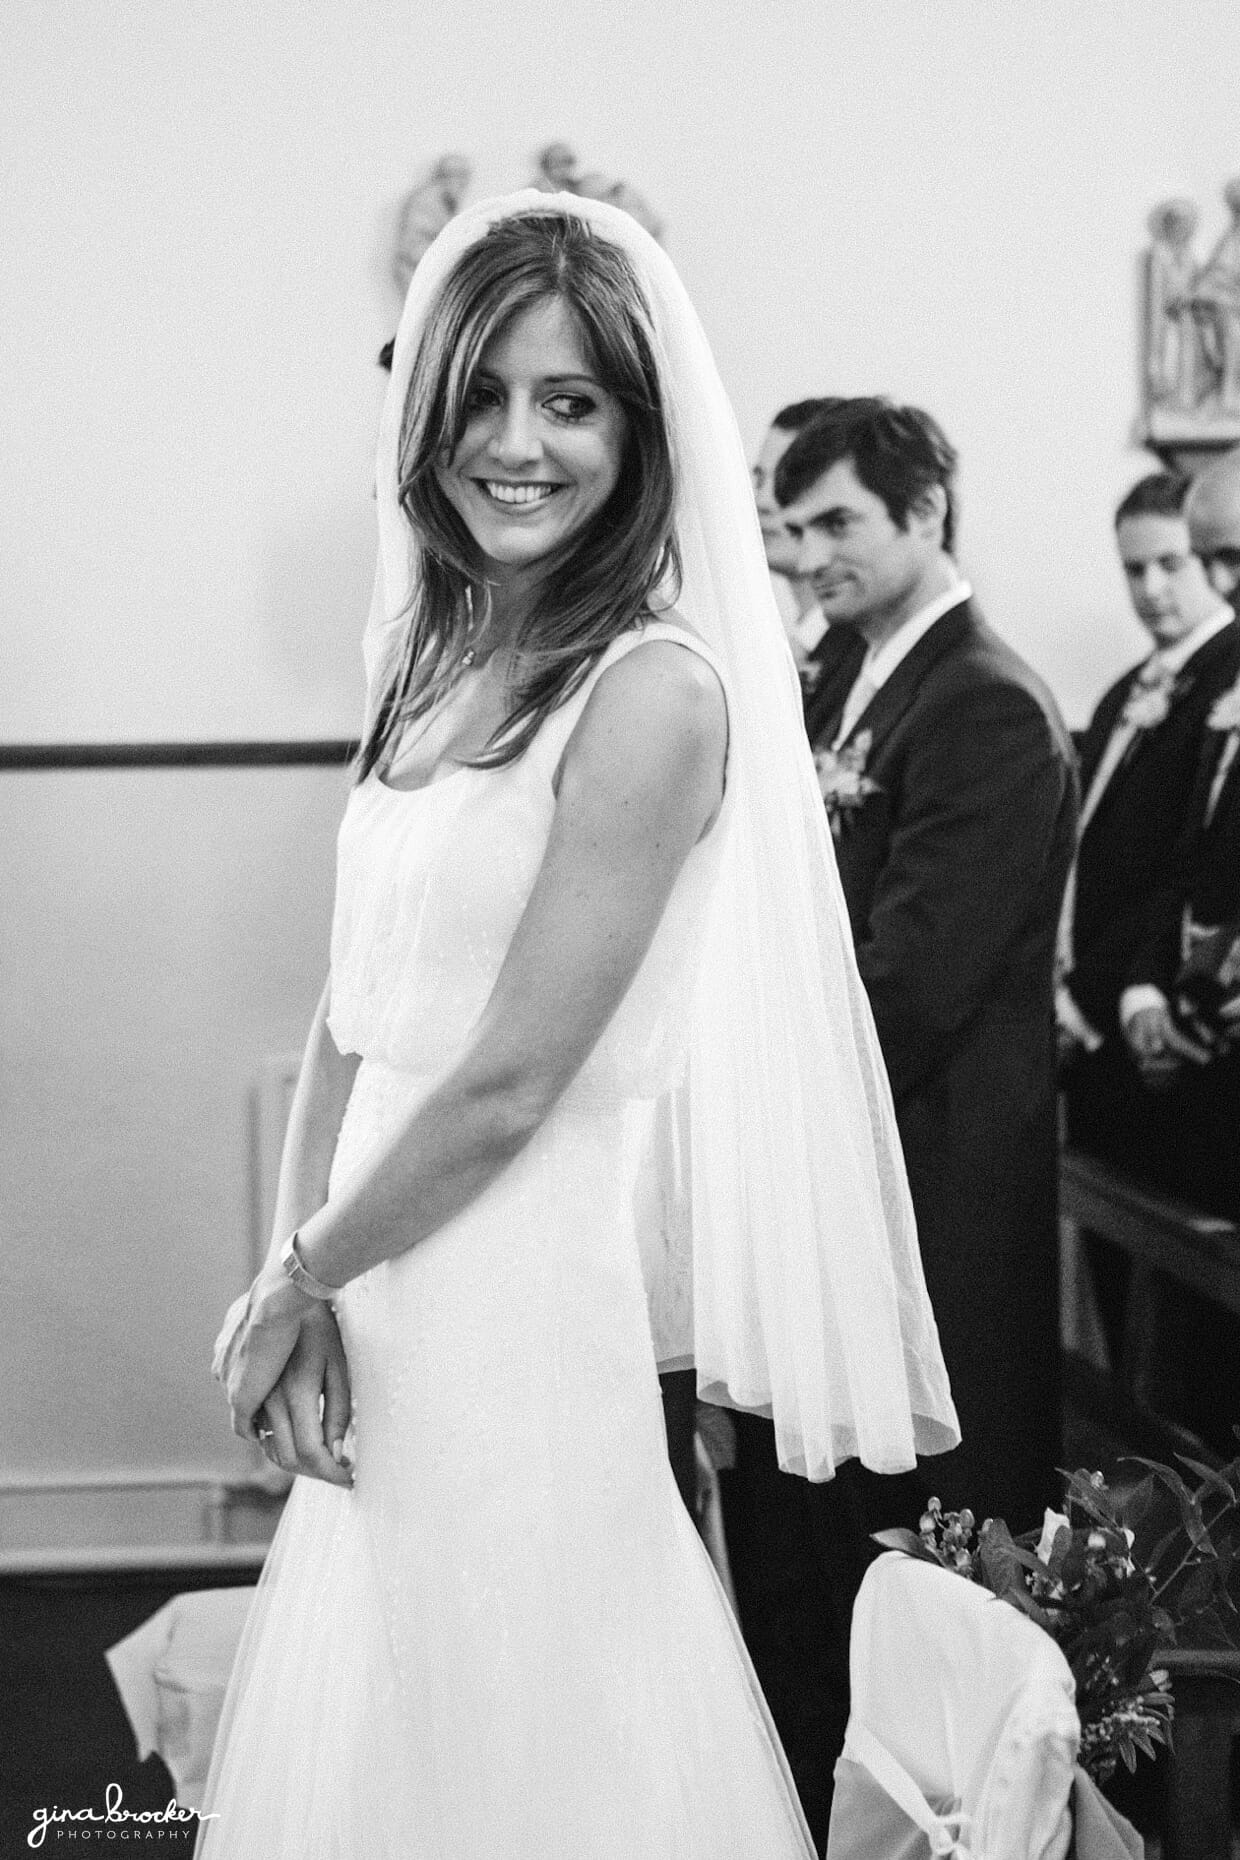 The bride smiles at her parents during her intimate wedding ceremony in a small church